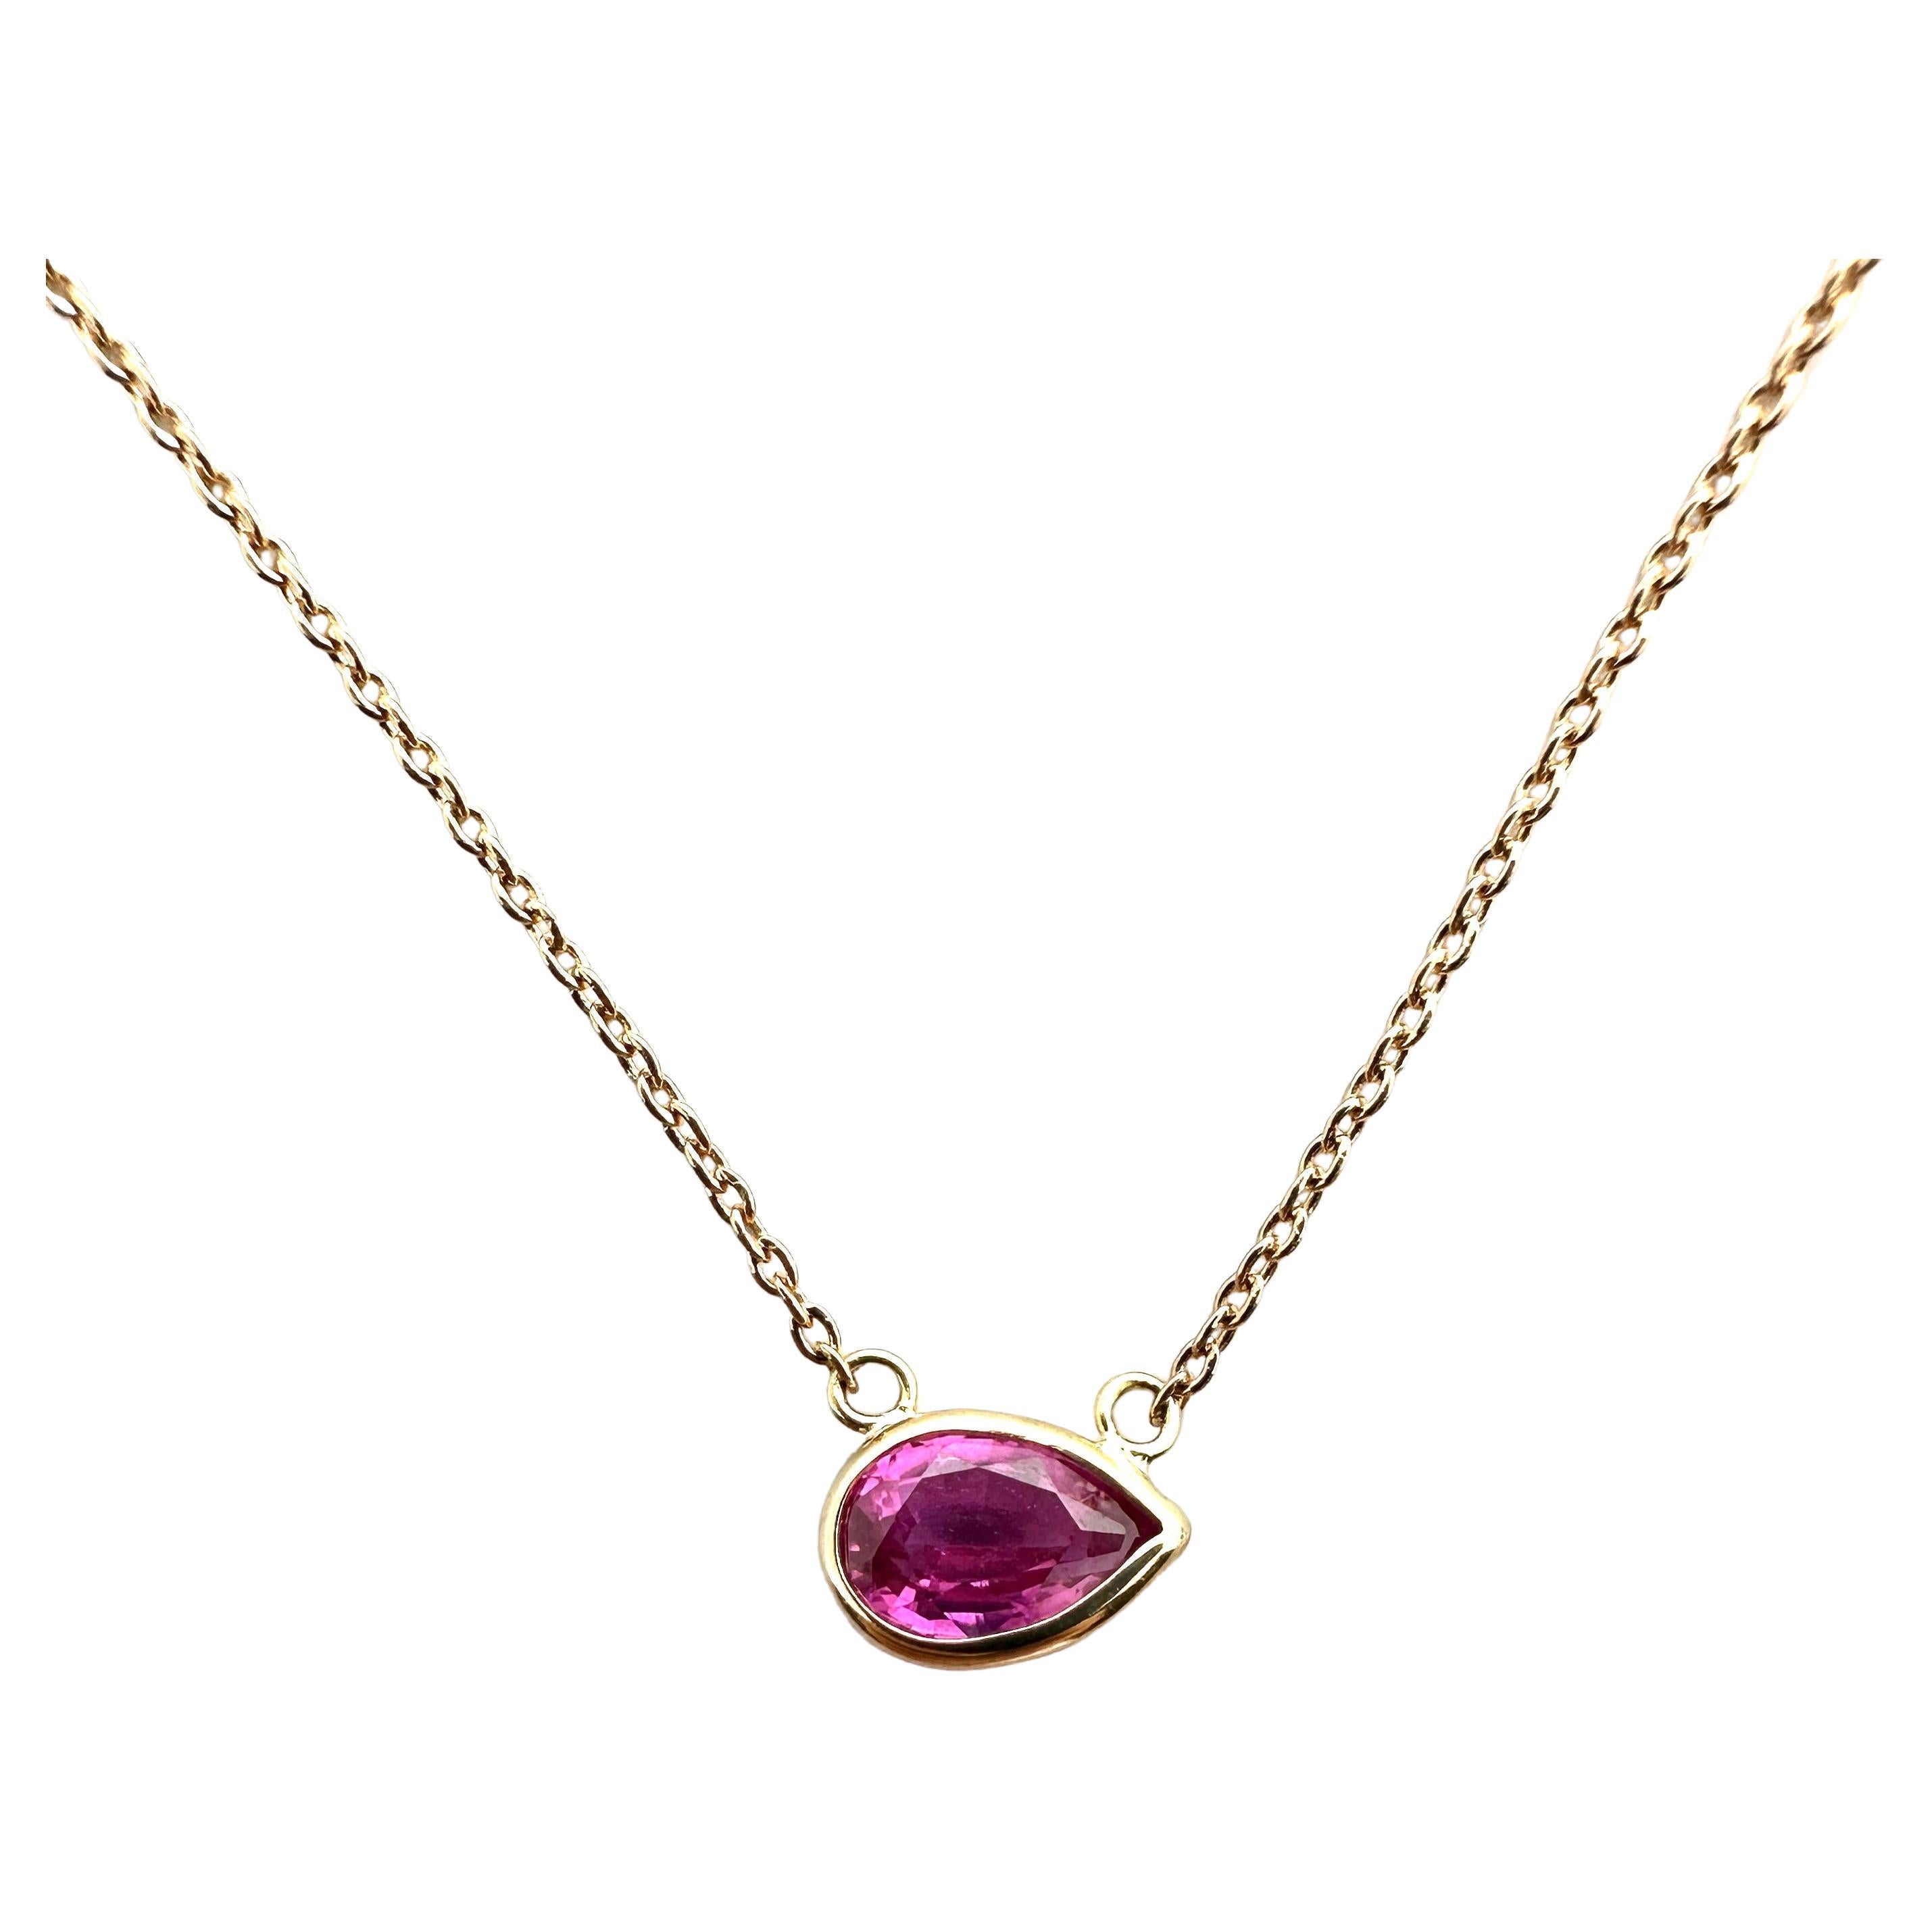 1.17 Carat Pink Sapphire Pear & Fashion Necklaces Berberyn Certified In 14K RG For Sale